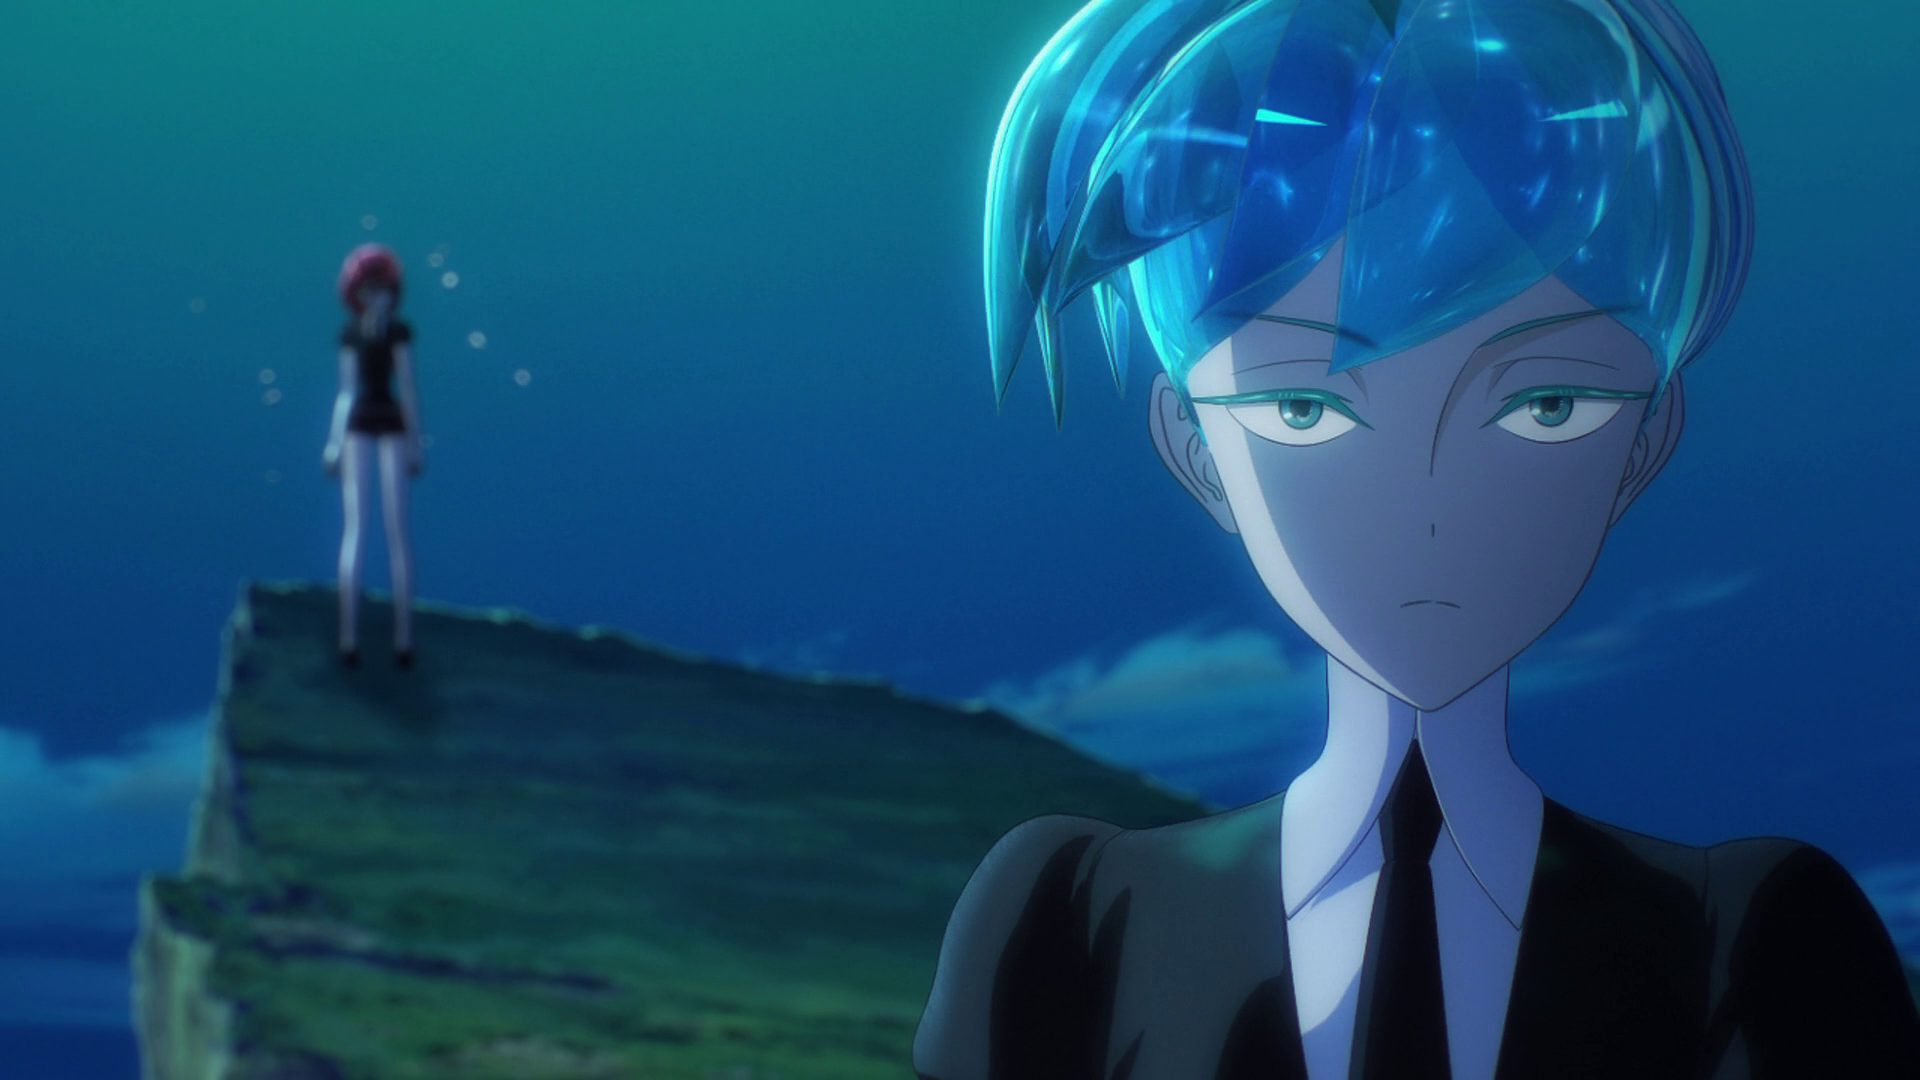 The audacious queerness of Land of the Lustrous